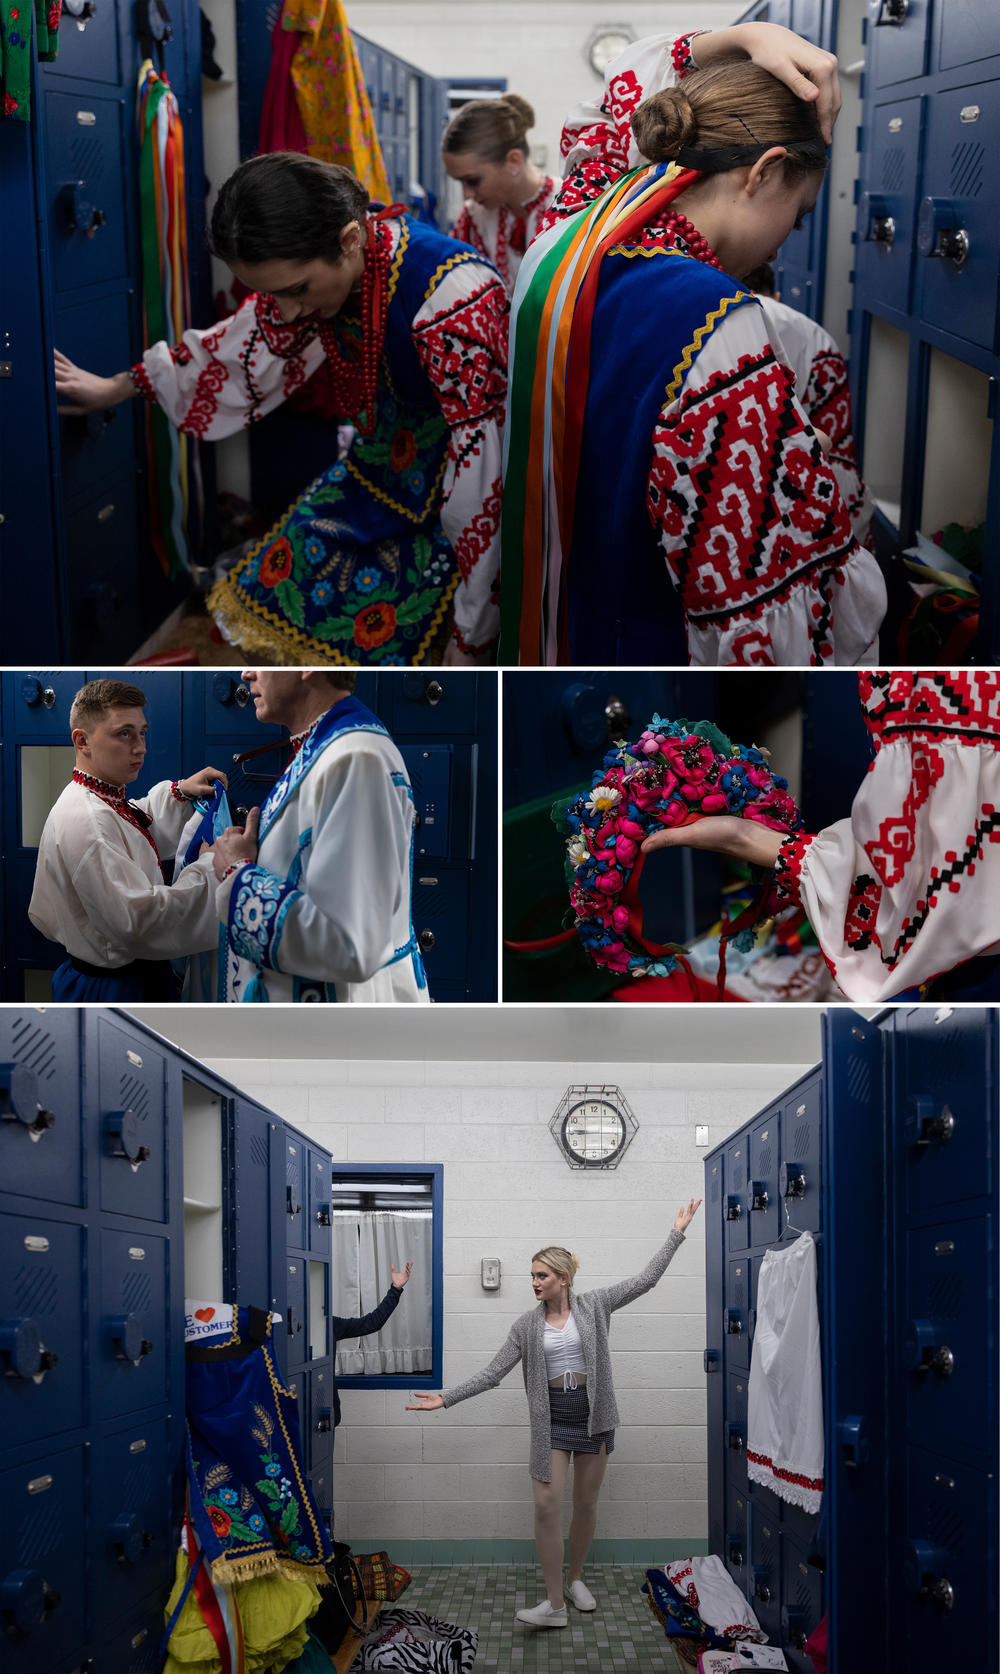 Members of the Voloshky dance ensemble get dressed and practice thier routine at the locker room at Penn High School.